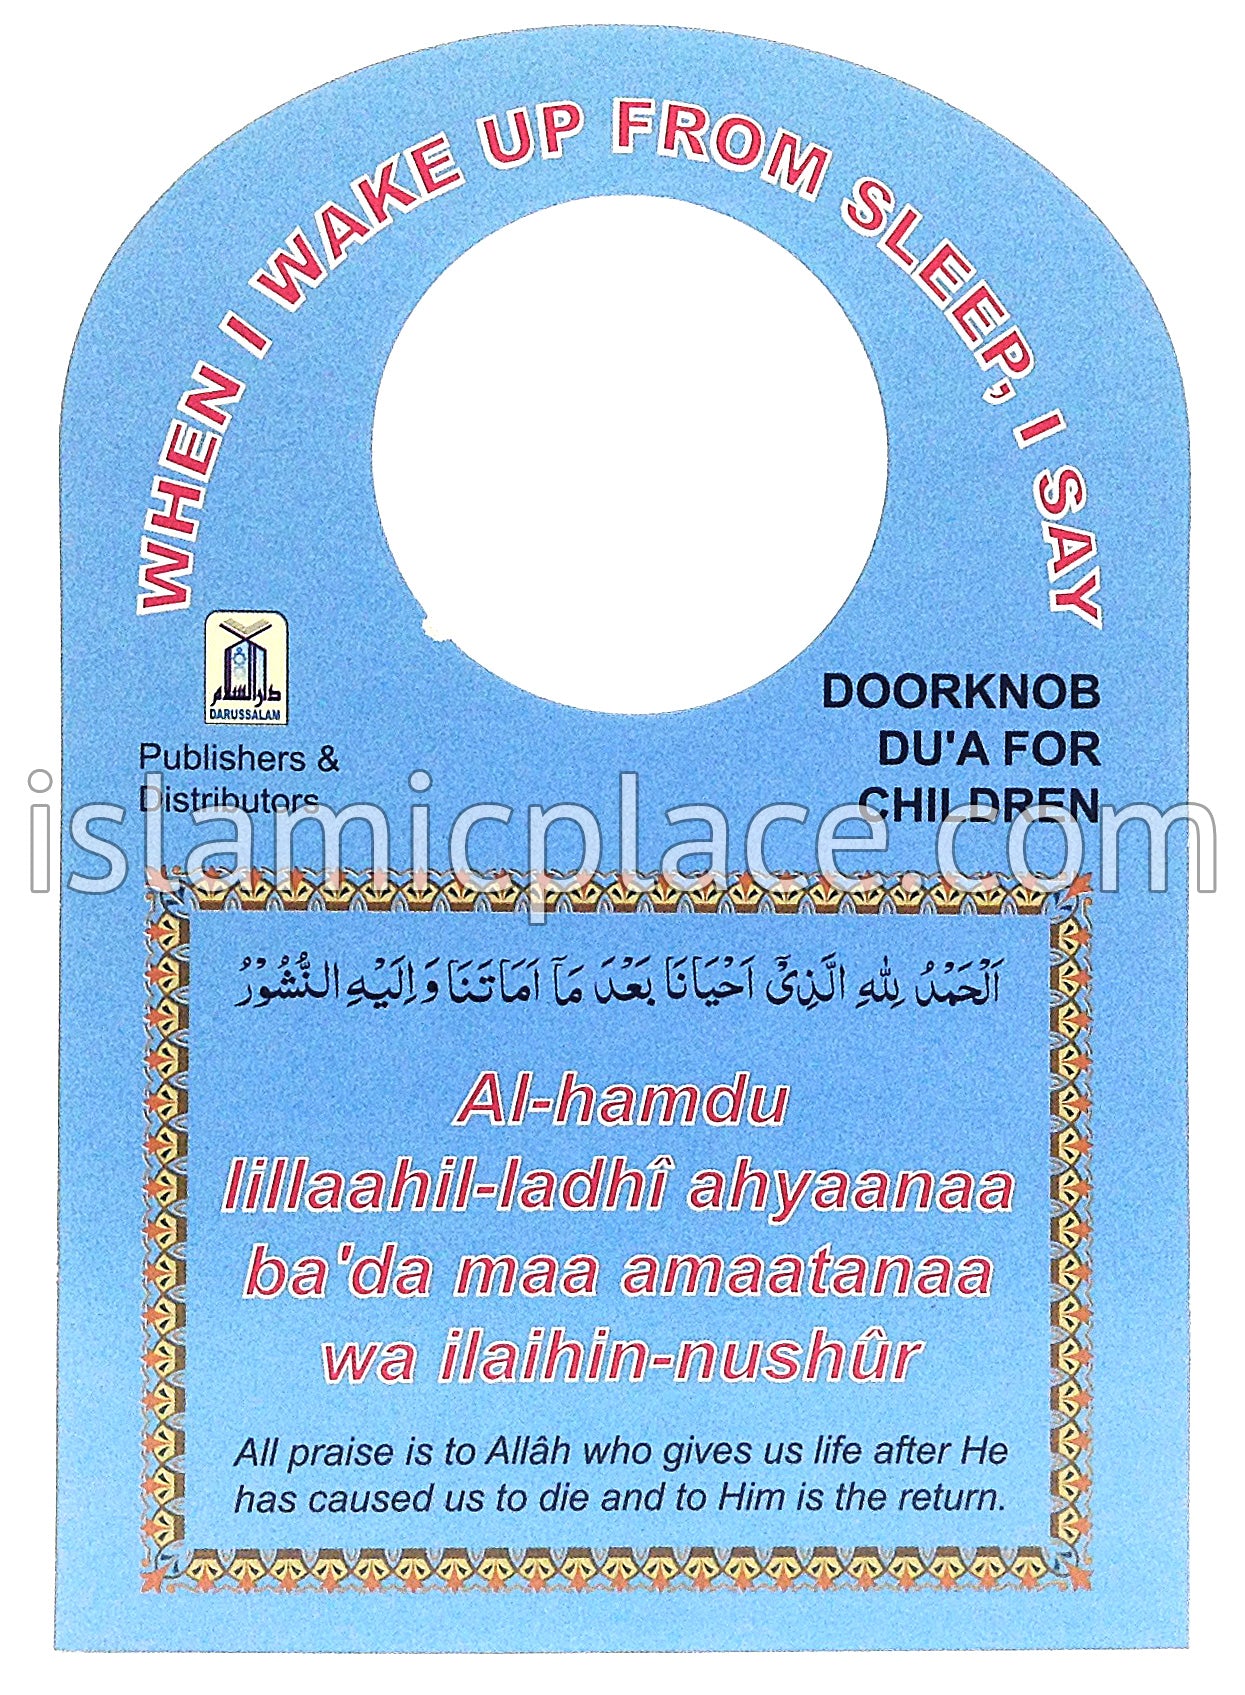 Double-sided Door Knob Dua Sign - Intend to Sleep and Wake up